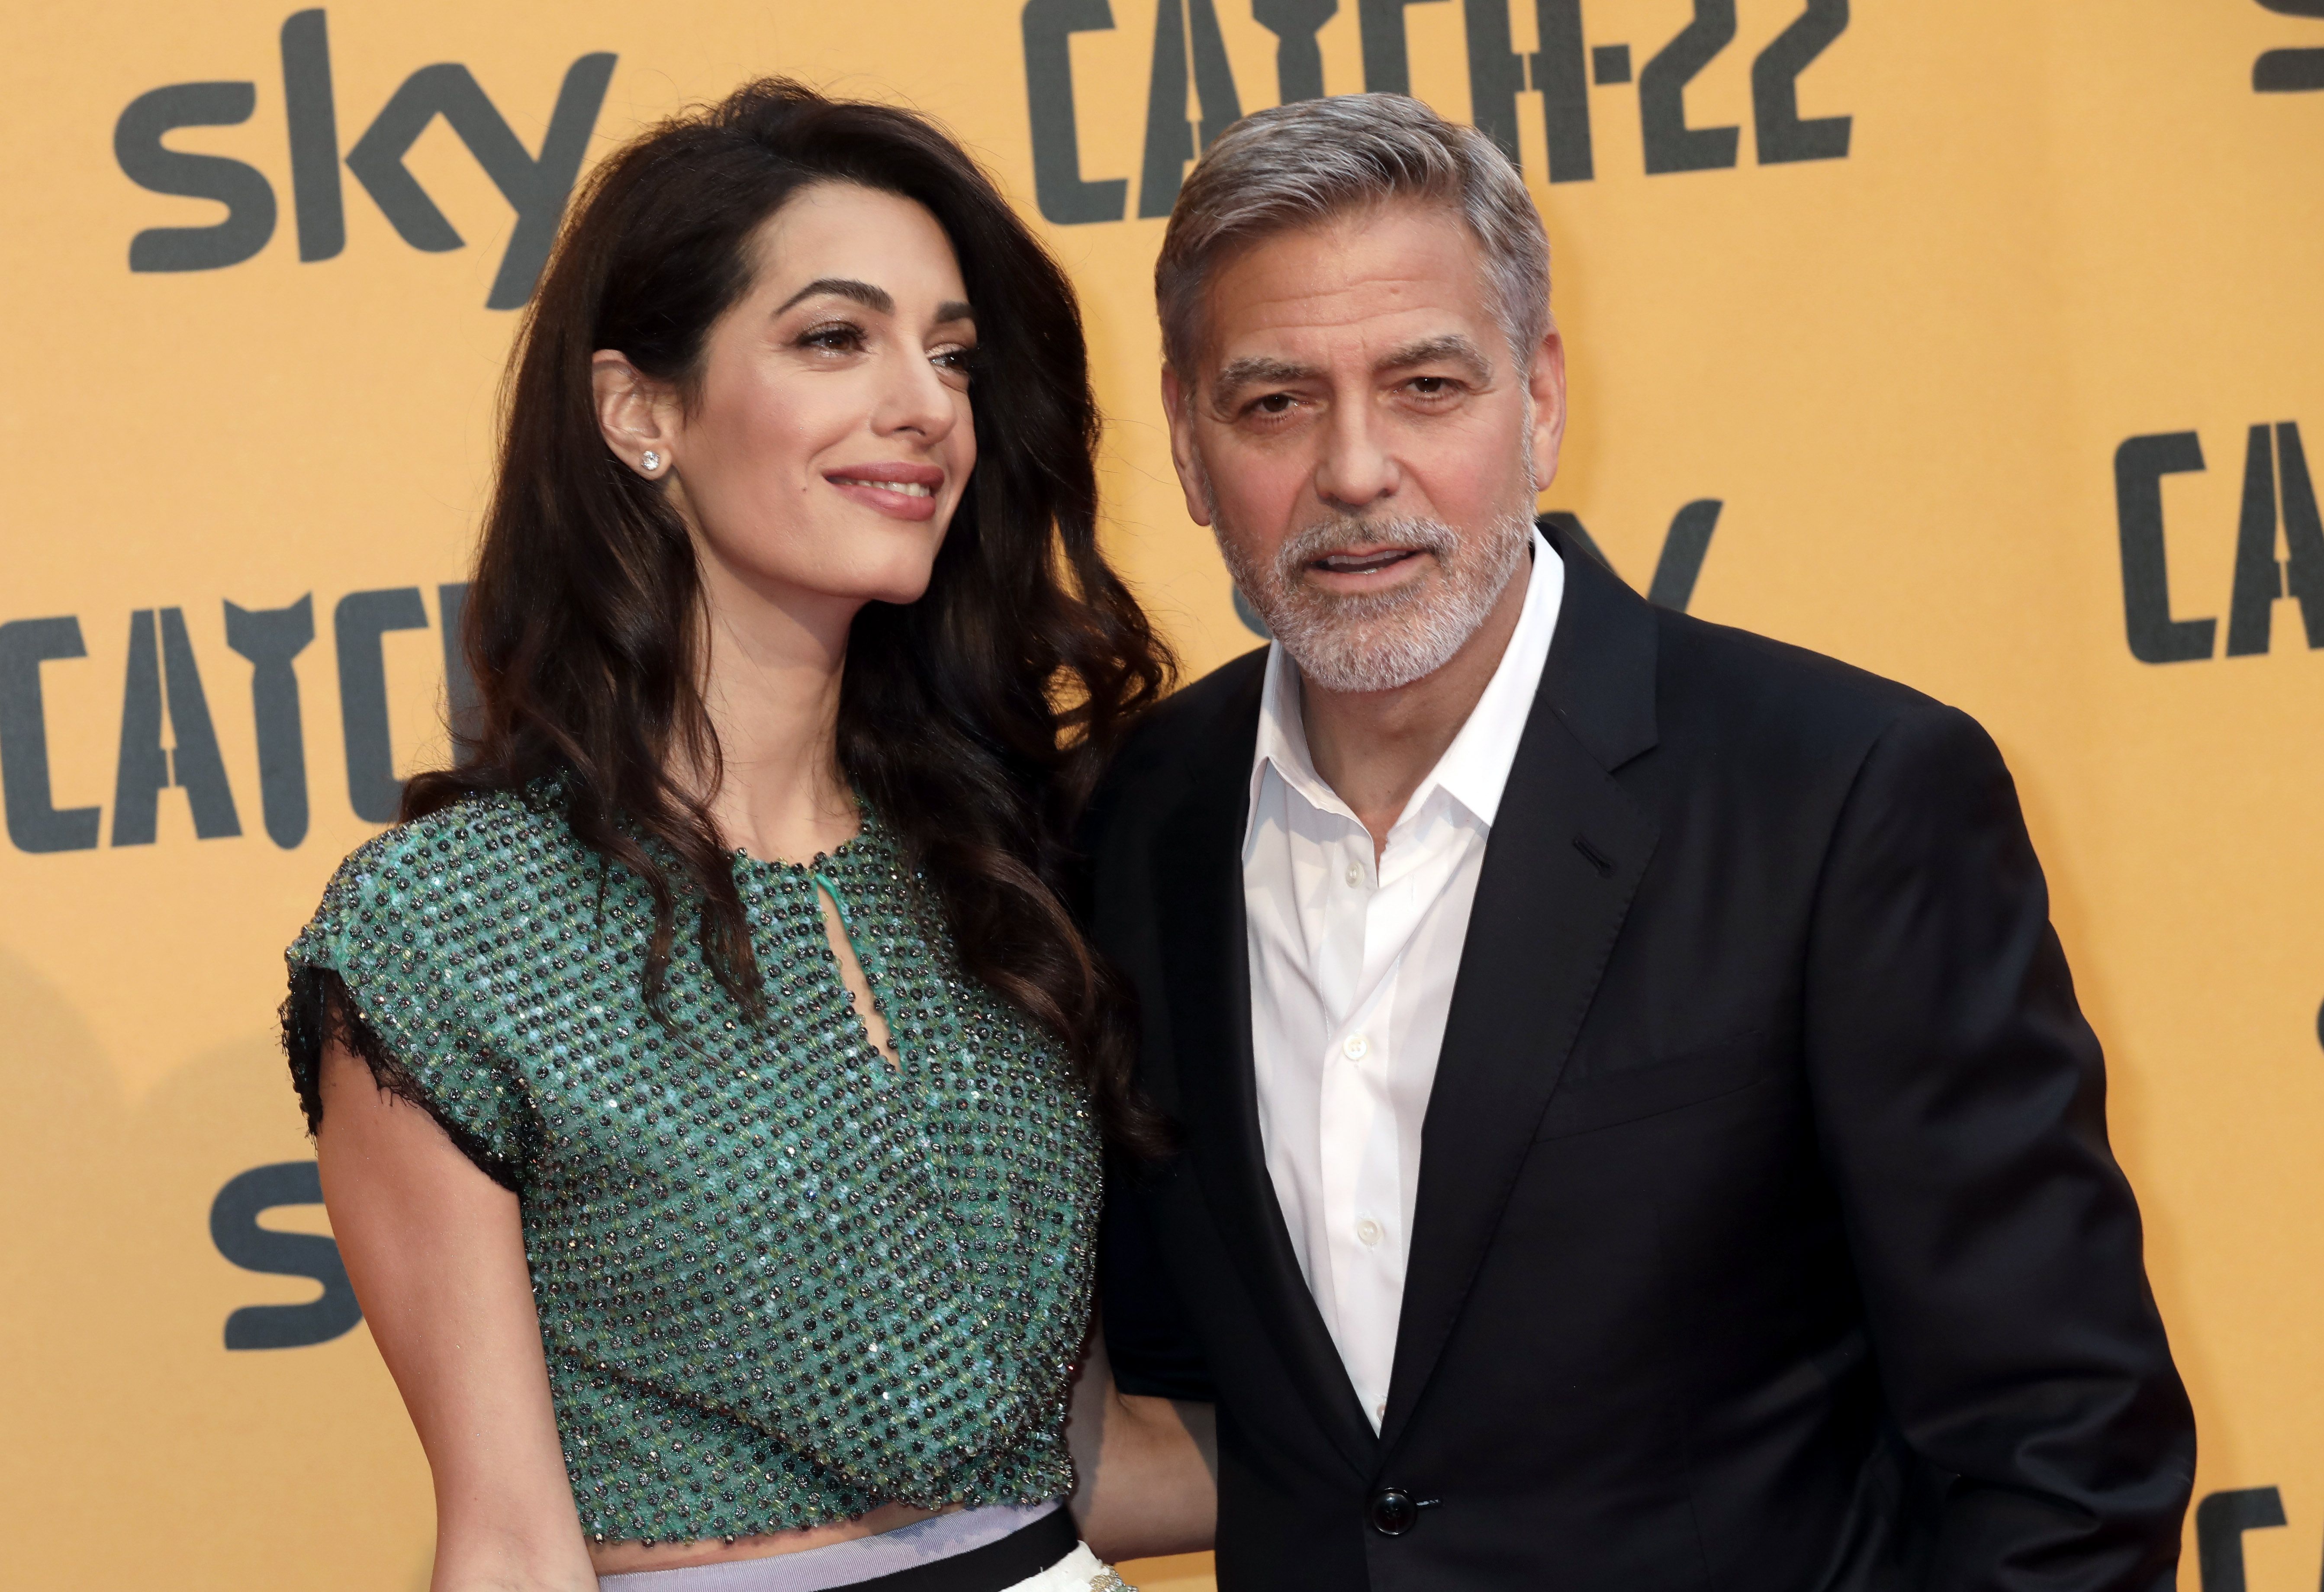 George and Amal Clooney at 'Catch-22' Photocall at The Space Moderno Cinema on May 13, 2019 | Photo: Getty Images